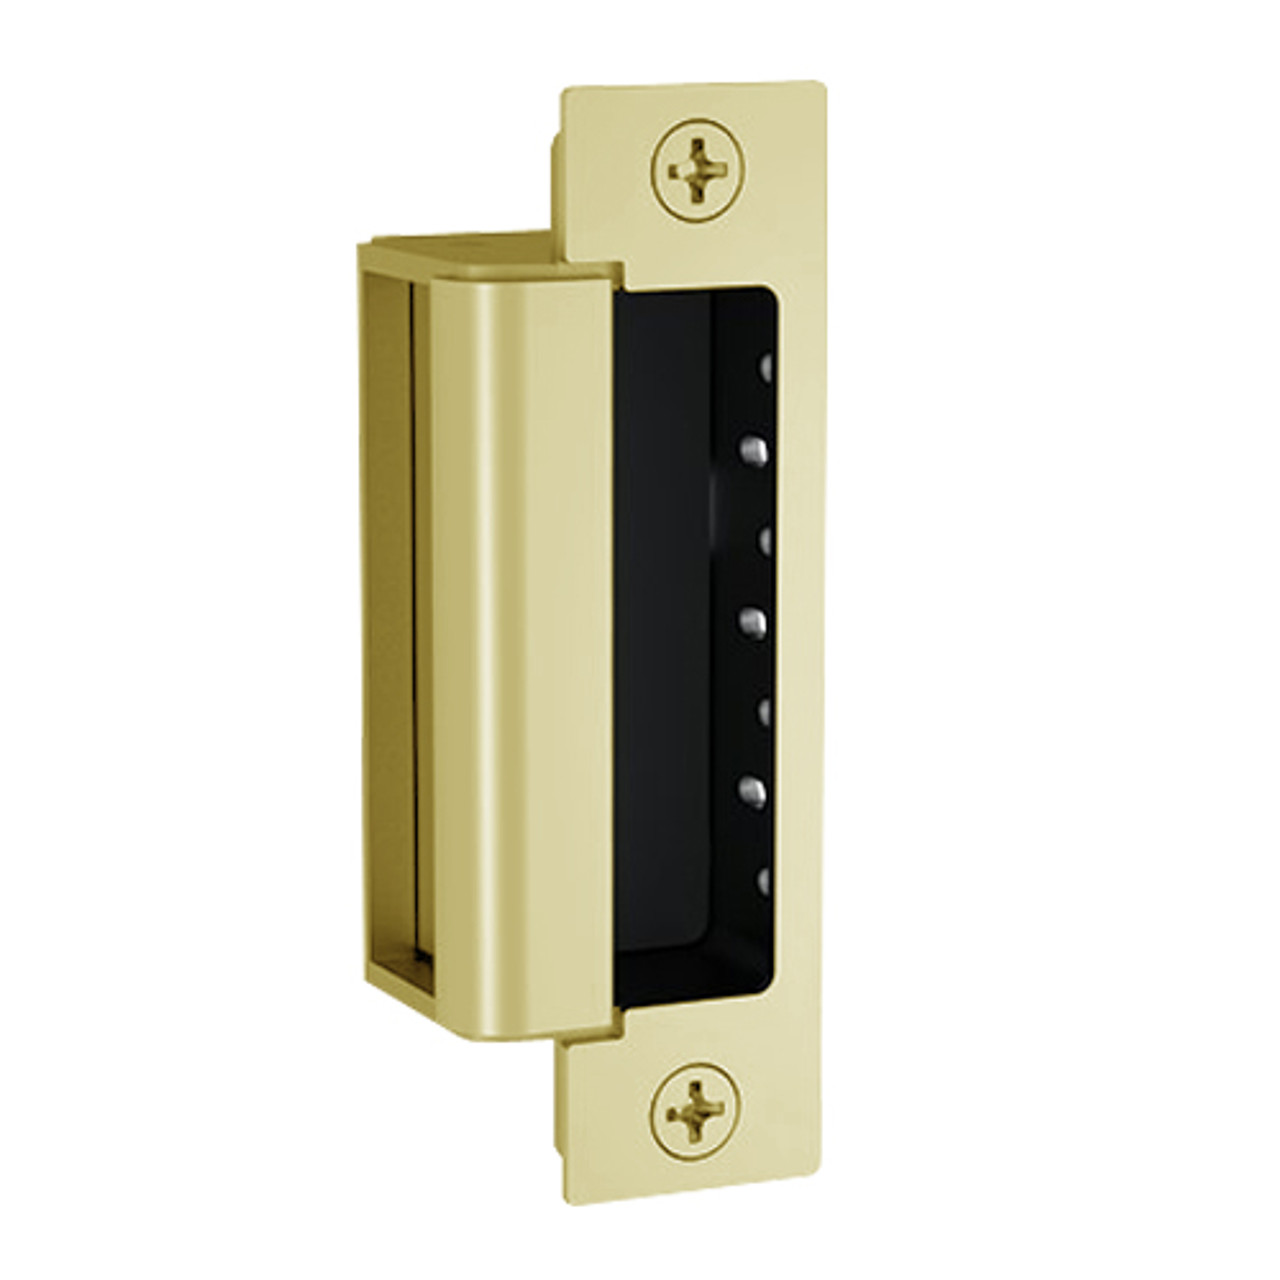 1600-CDB-LMS-606 Hes 1600 Series Dynamic Low Profile Electric Strike for Deadbolt Lock with Lock Monitor & Strike Monitor in Satin Brass